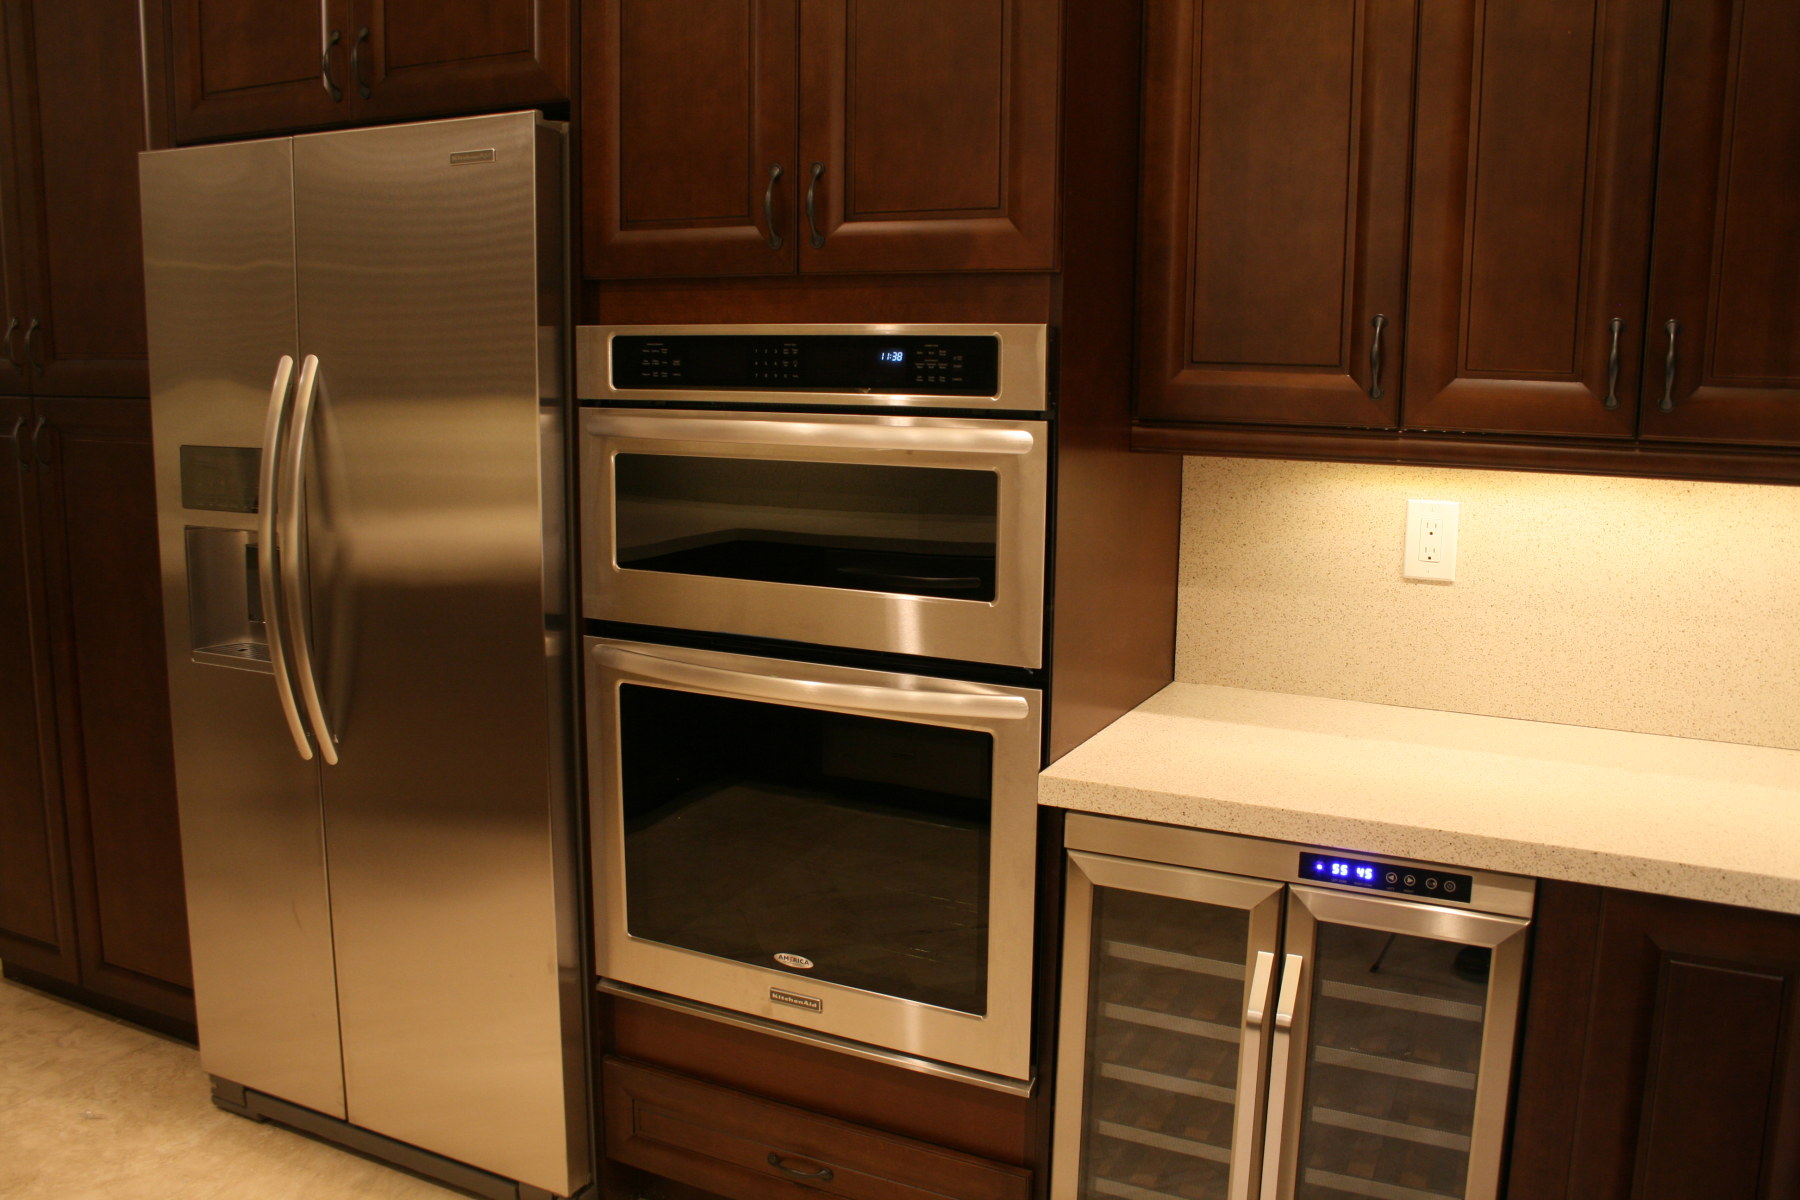 Stainless Steel Refrigerator, Double Oven and Wine Cooler